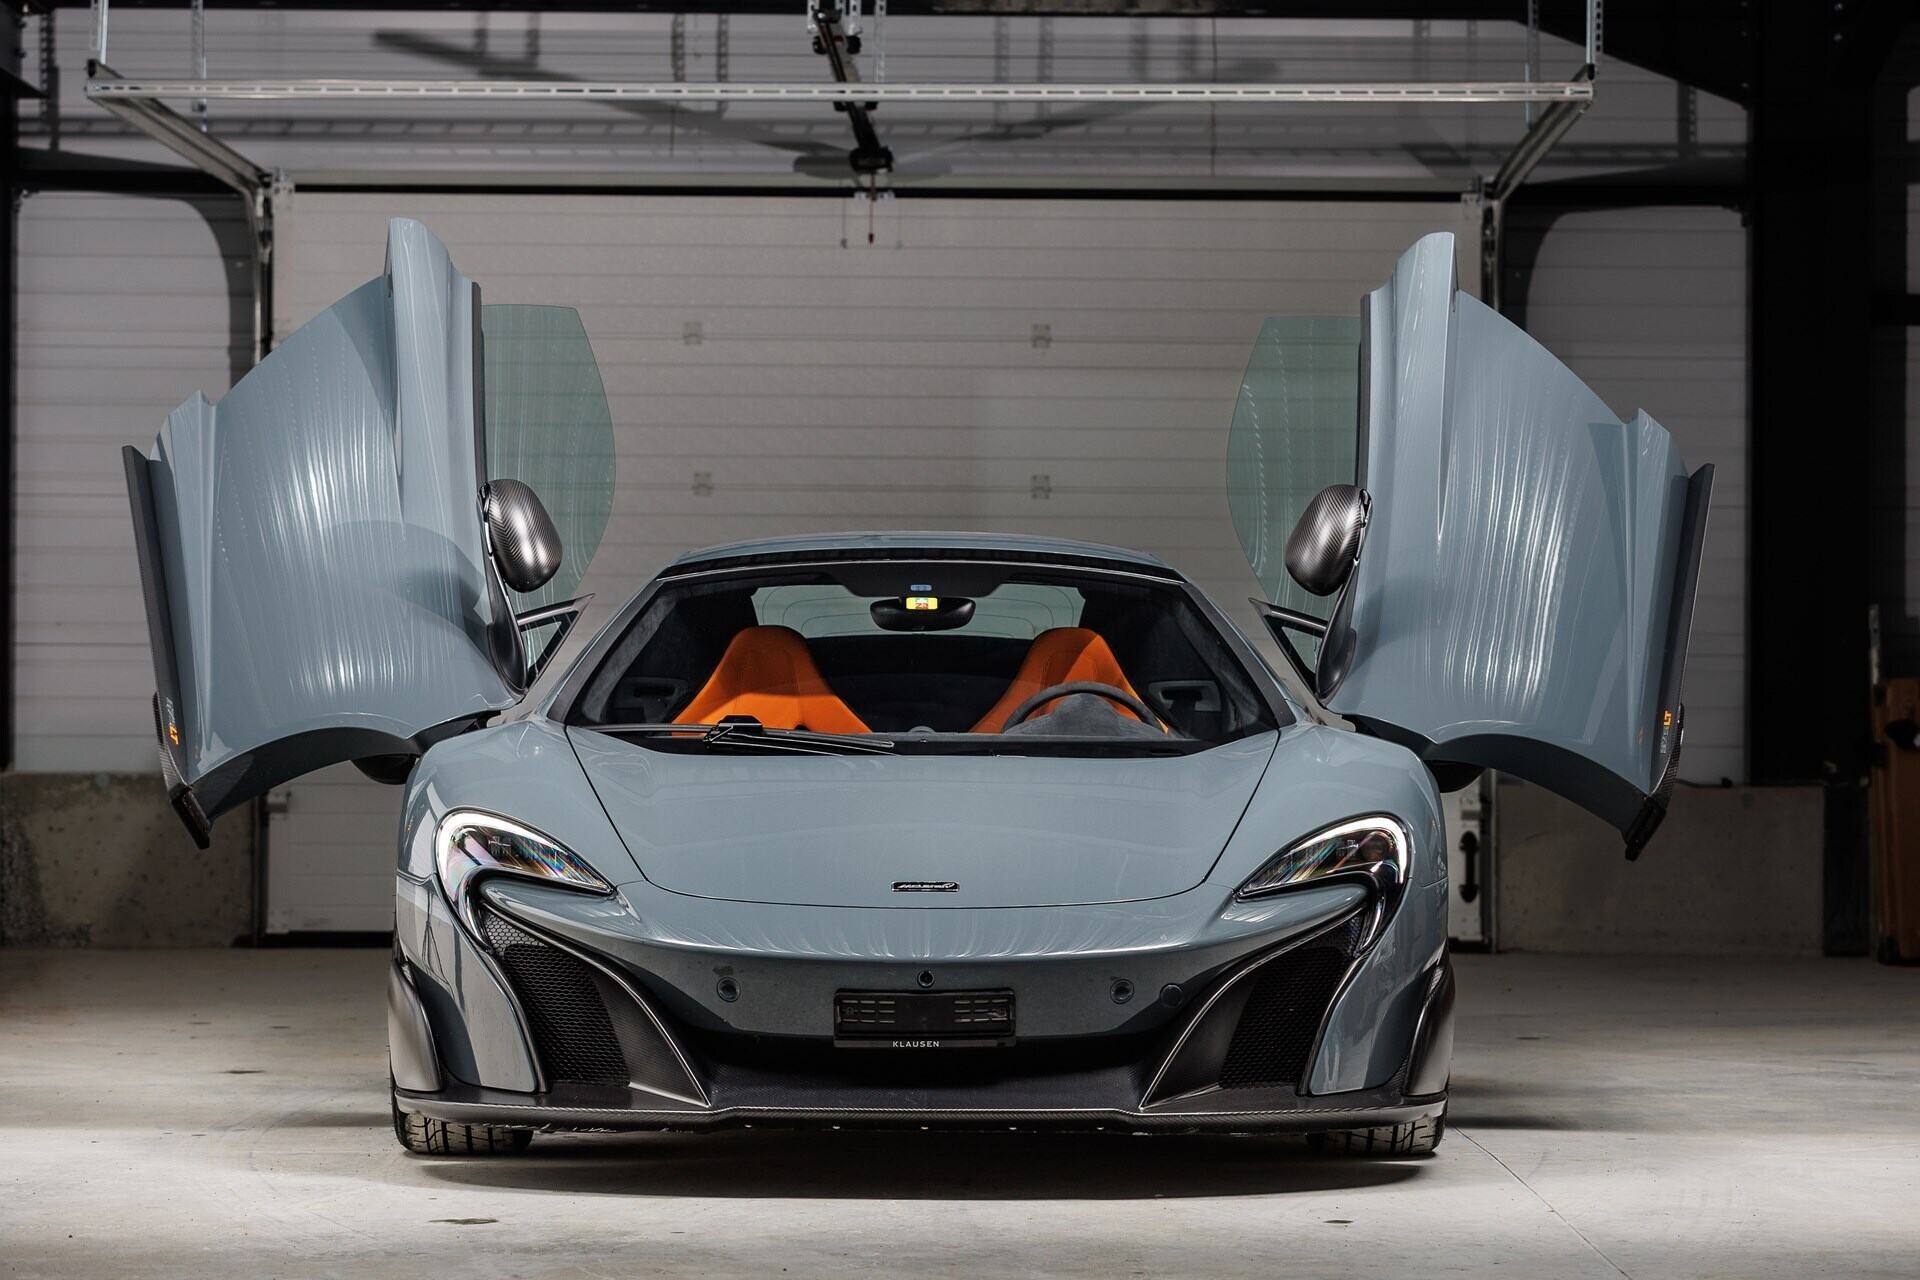 Frontal view of a 2017 Chicane Grey McLaren 675LT with butterfly doors open